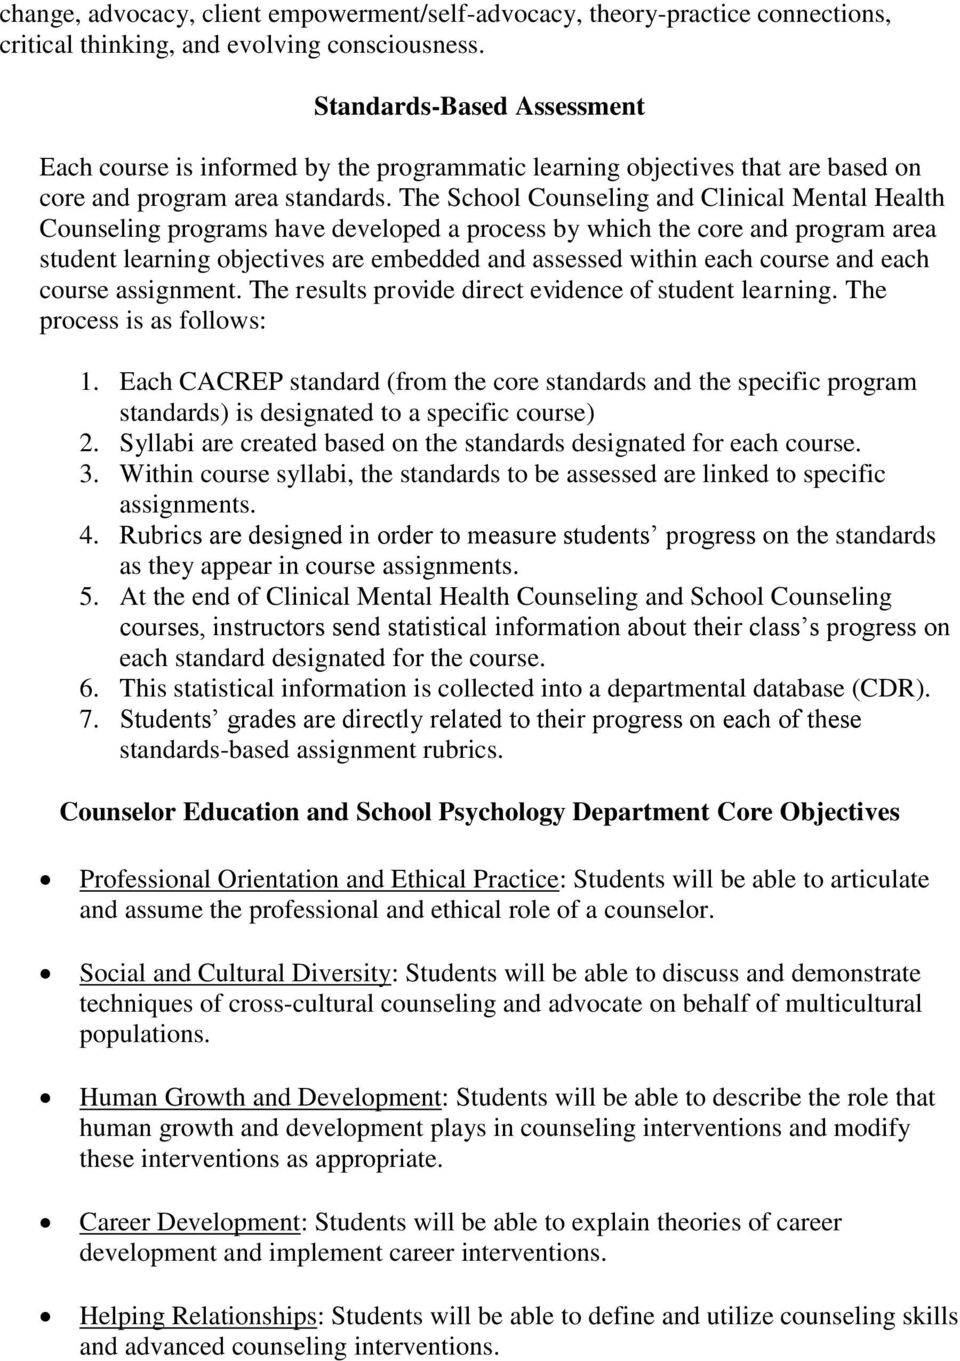 The School Counseling and Clinical Mental Health Counseling programs have developed a process by which the core and program area student learning objectives are embedded and assessed within each